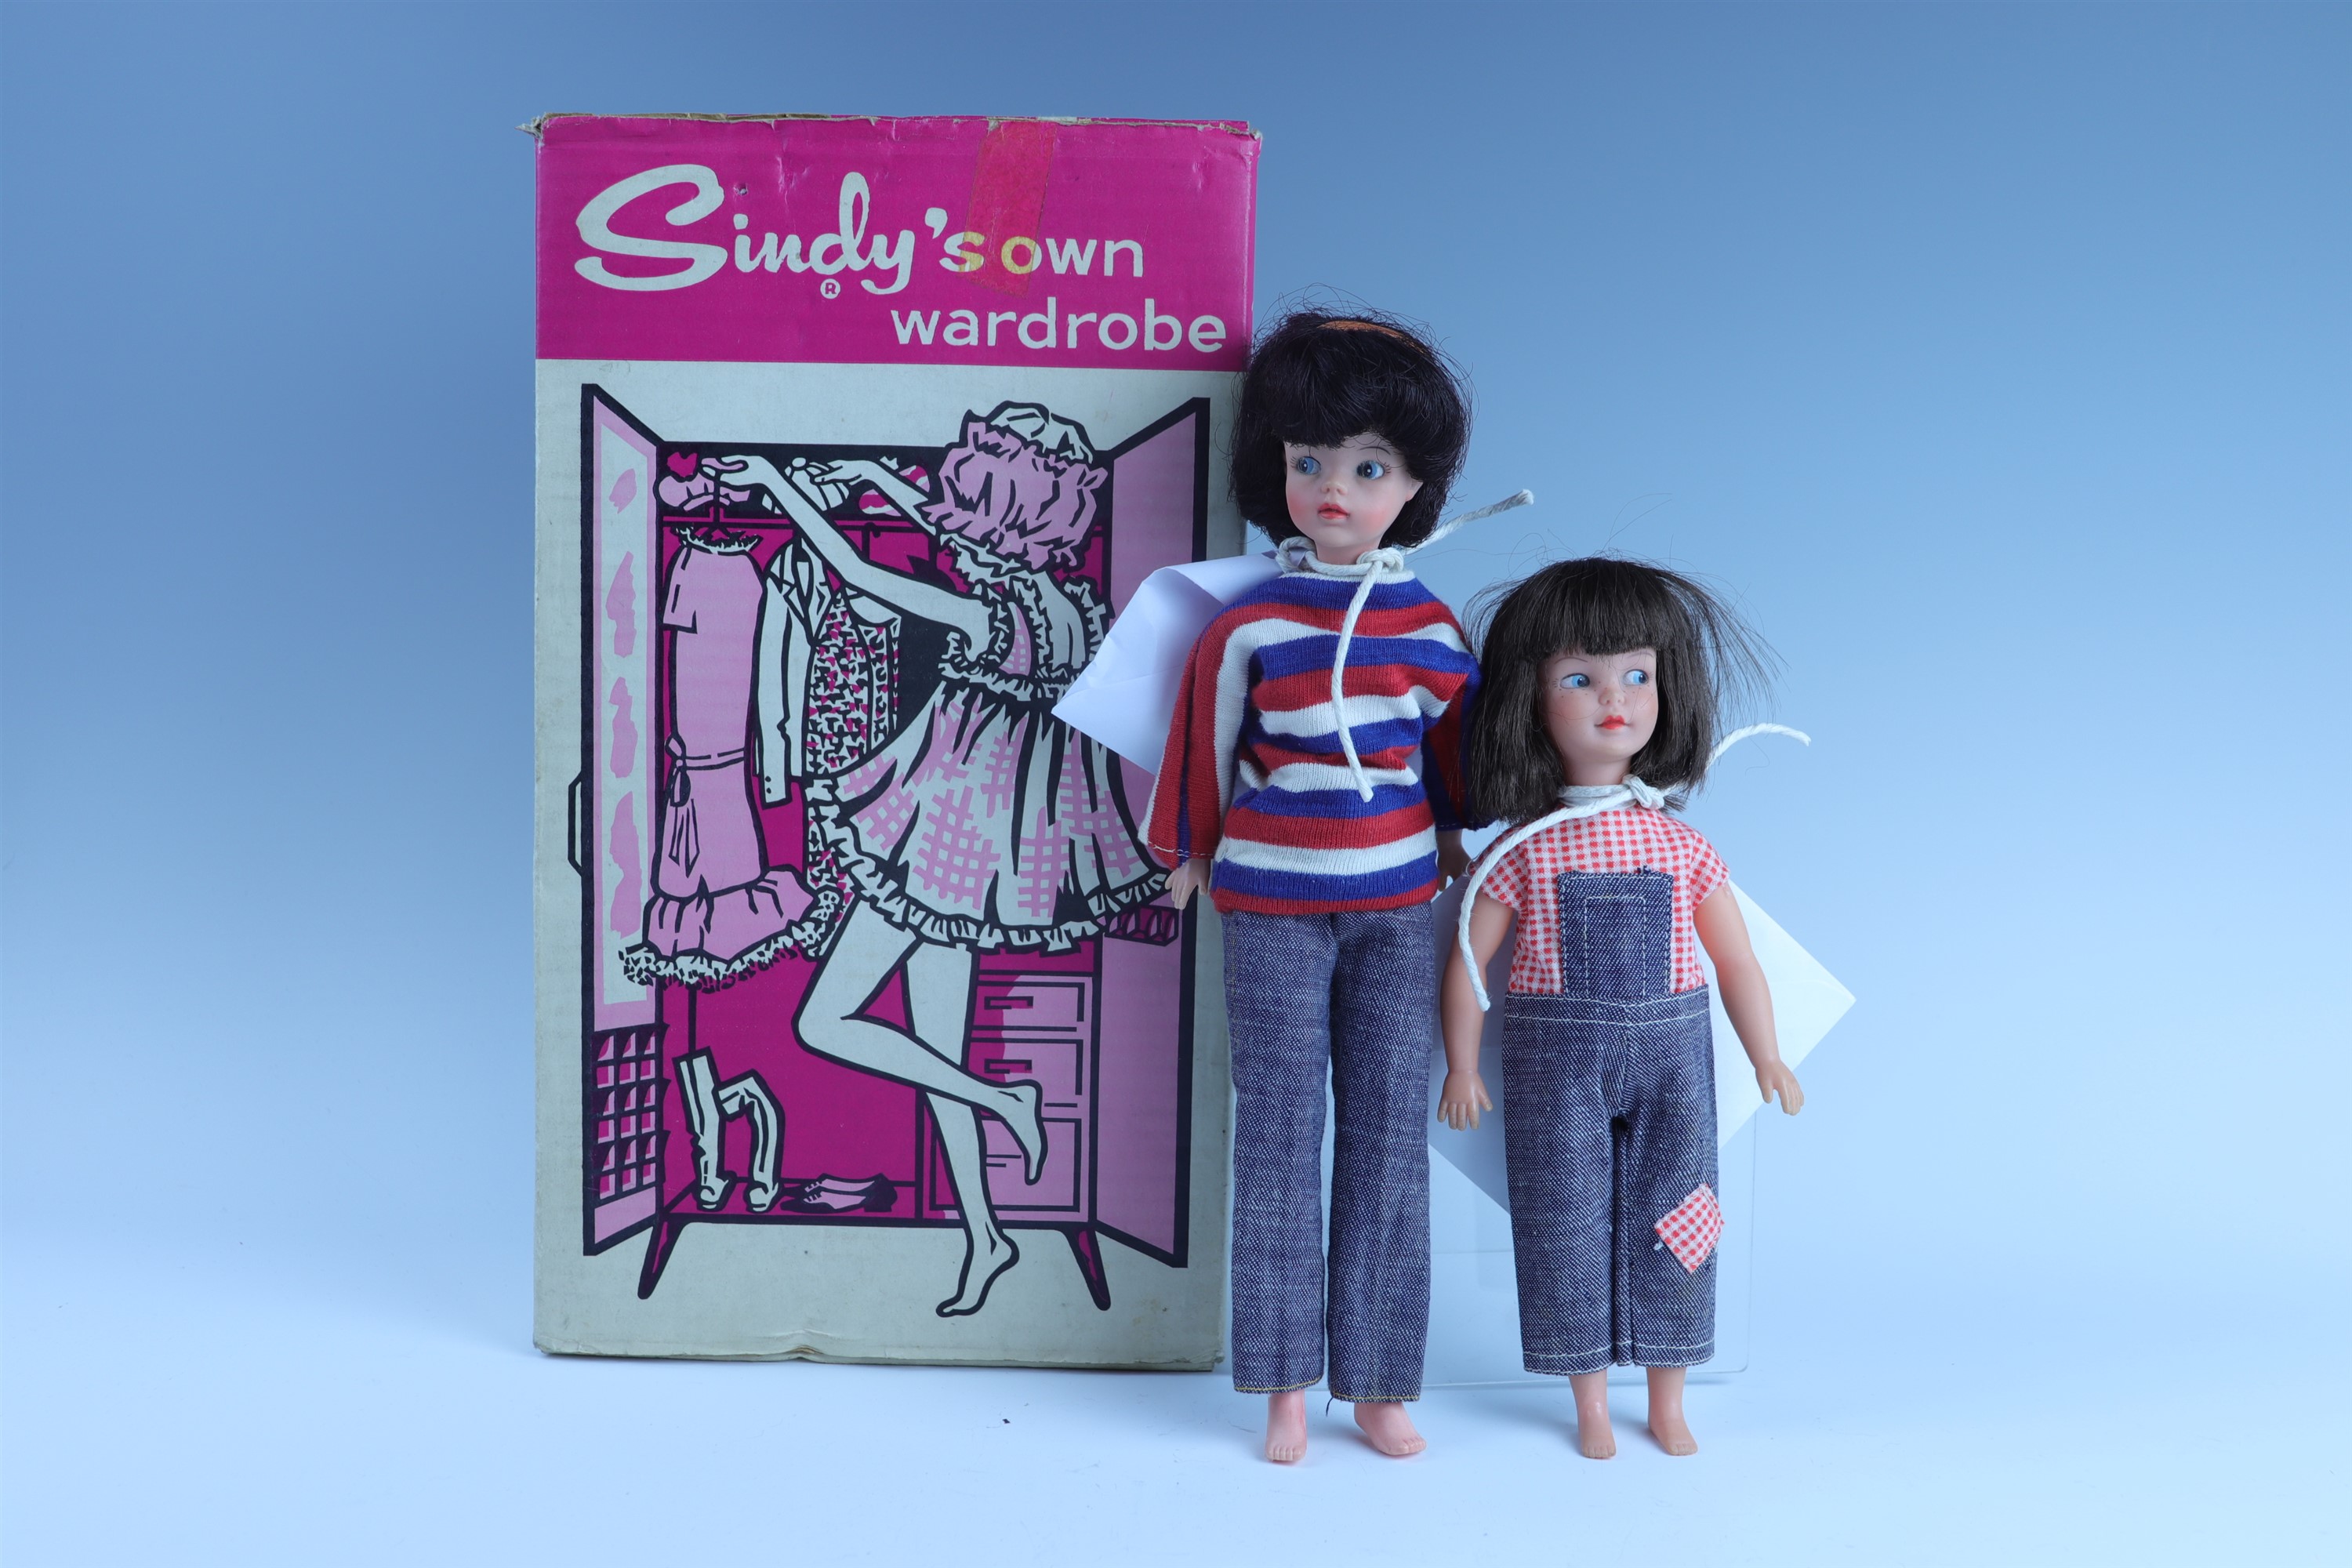 A 1960s Sindy dolls together with clothing, a wardrobe and other accessories